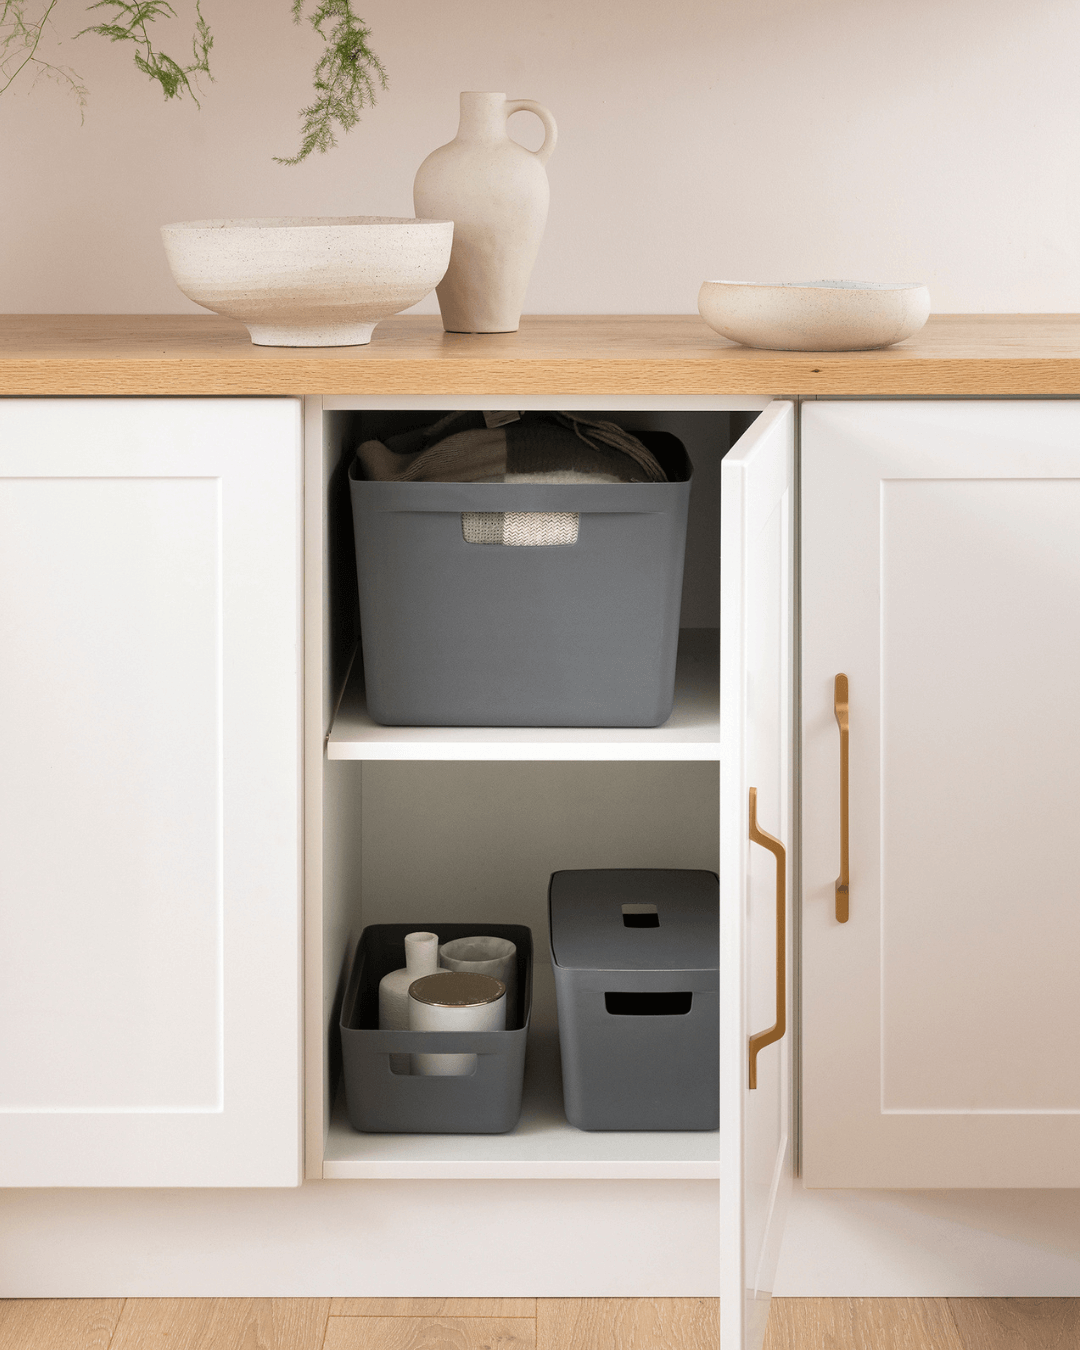 Organise & Clean with Inabox Is getting the house organised one of your New Year’s resolutions? There’s no time like the present to reset and give your home a deep clean! It might seem like a mammoth task, so we’d recommend completing one room per week. Here are some tips for getting started on those key areas: Discard old cleaning products Completing a stocktake of your household cleaning products is an often-overlooked part of the whole process. These can accumulate over years, so it’ is important make sure you’re still using products that work, while decluttering at the same time. Check the use by dates and discard any cleaning agents that have expired. Store all remaining cleaning products in our handy Modular Containers. Coming in a variety of stackable and functional sizes, this storage solution will compliment any style of room with sleek, neutral tones. Avoid contamination and minimise waste by assigning washable, colour-coded microfibre cloths to each room, like pink for the kitchen and green for the bathroom. . Kitchen Store your sprays, detergents and oven cleaners in a Modular Container under the sink. Pair with a pink microfibre cloth for tackling greasy kitchen areas. Go through your fridge, freezer and pantry, discarding any unwanted goods. Take out all other items shelf by shelf and wipe everything thoroughly. Distribute your significant kitchen items, such as condiments, cling wraps/foils and perishable objects into a series of Modular Containers. Clean the inside and outside of your microwave and oven. Spray and wipe your benches, cabinets, stove top and splashbacks. Bathroom Start by removing the contents of all drawers and cupboards, discarding any empty bottles or trash. Wipe out and rearrange your bathroom essentials. Our Insert Trays can help with dividing your items into smaller compartments, to neatly store things like toothbrushes, skincare, razors and makeup. Take everything out of the shower and use a cleaning agent to scrub the floors, walls and glass. Don’t forget to remove the cover of your ceiling fan and give it a soak. This will get rid of excess dust and prevent mould from forming. Shine up the bathroom mirror with a dry paper towel and glass cleaner. Sweep and mop the floors. Finally, give your toilet a deep clean by soaking the inside with bleach and using a surface cleaner to wipe down the external surface. Laundry Using one of our stylish Modular Containers, store your laundry detergent, fabric softeners and a yellow microfibre cloth, neatly keeping everything in one place. This can be displayed out on the laundry bench or stored away in a cupboard. Spray and wipe down your benches and the exterior of your washer and dryer. Remove the filters and soak in warm, soapy water for 10 minutes. Laundries are great storage rooms for spare linens and towels. Remove existing items from the cupboards so you can spray and wipe the shelves, then reorganise the contents, repacking everything into Modular Containers, so that your linen and towels are organised and protected from dust Outdoor and Pool When sprucing up outdoor areas, larger tools such as pressure hoses, mulch and buckets are required. The ideal location for storing these bulky items is in an outdoor shed or garage. This being the case, you want a sturdy storage solution to keep your items safe from the elements. Our Heavy Duty Containers range from 27L to 100L, designed with durability in mind, they come in a variety of shapes and sizes, as well as a padlock socket for added security. For your smaller items, such as seeds, nails and tools, the Heavy Duty Insert Tray is perfect. Whereas our Heavy Duty Dividers allows for easy separation of contents, providing quick and easy access to your belongings. Voila! Your home will be looking spick and span with the help of Inabox storage solutions and ready to take on the New Year!. For more storage tips, tricks and ideas, visit our blog or follow us on Instagram, Facebook and Pinterest. 